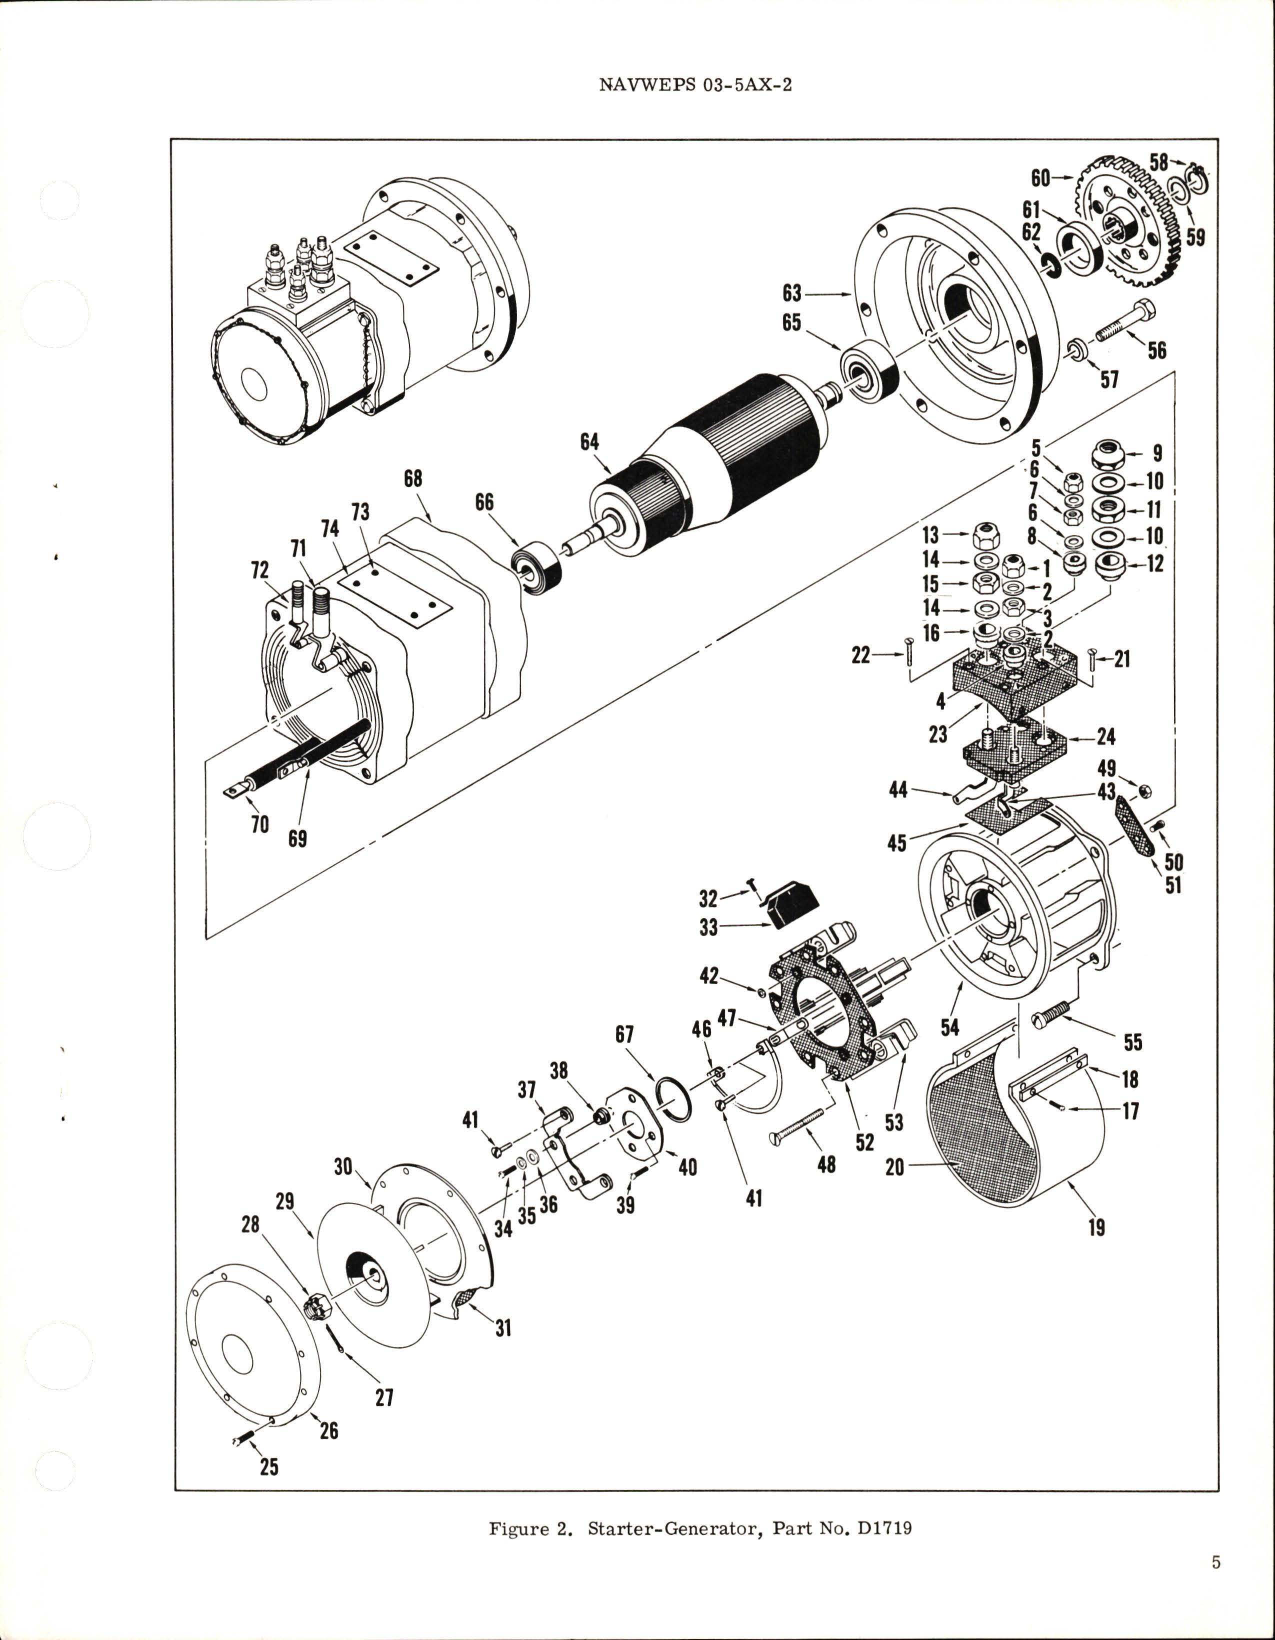 Sample page 5 from AirCorps Library document: Overhaul Instructions with Parts Breakdown for Starter Generator  - Part D1719